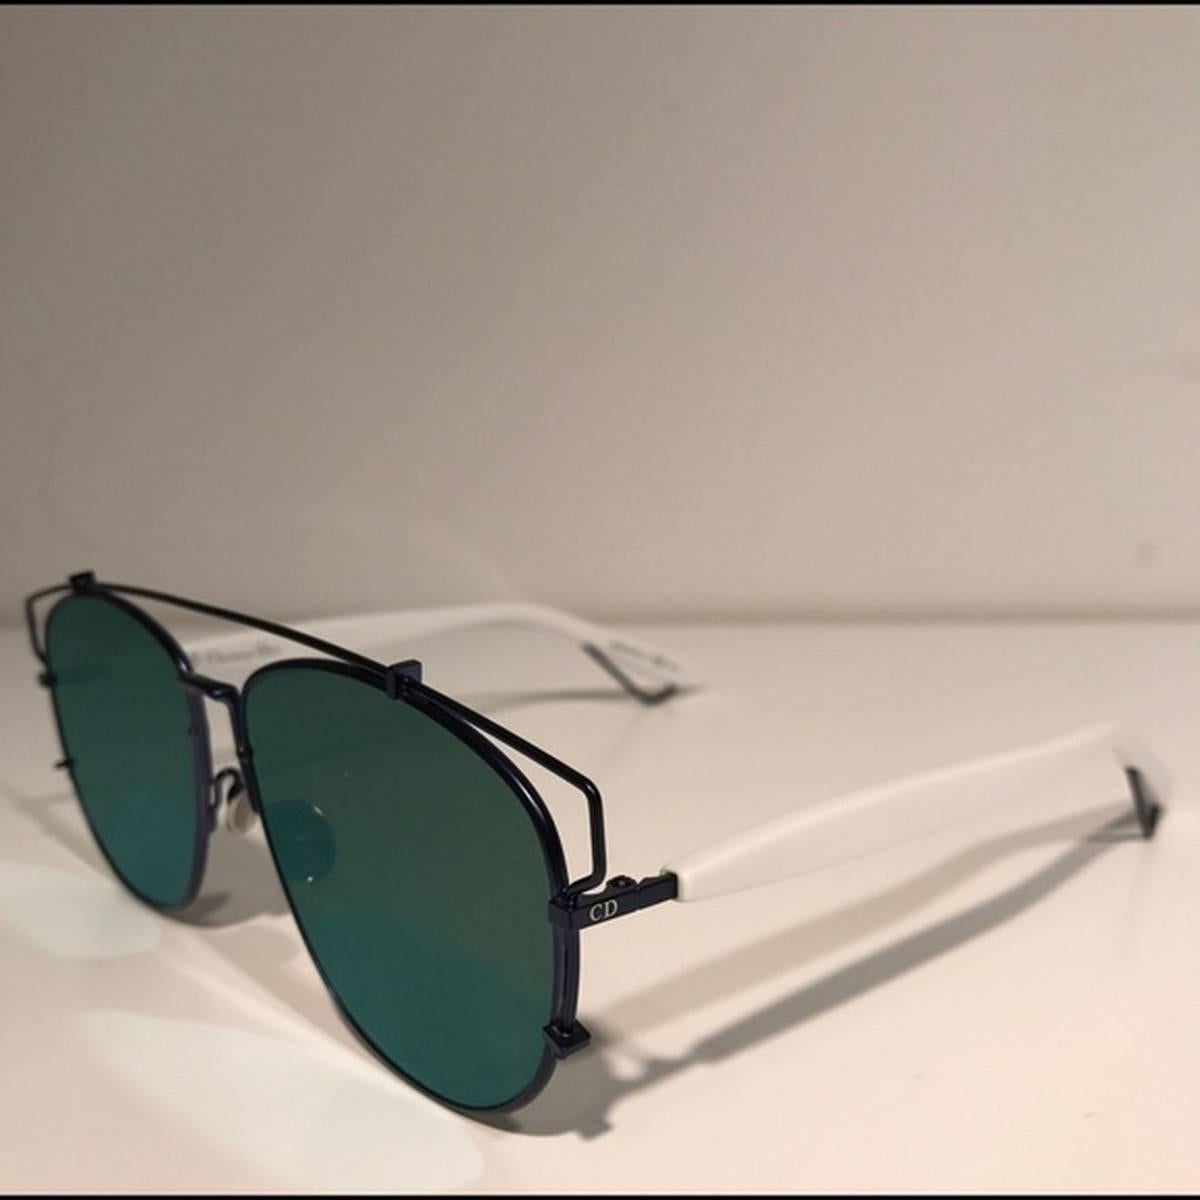 Dior White Mirrored Technologic Sunglasses
Color: Black/White
Size: OS

Brand new with box.
Unused condition.
No flaws.
Made in Italy.